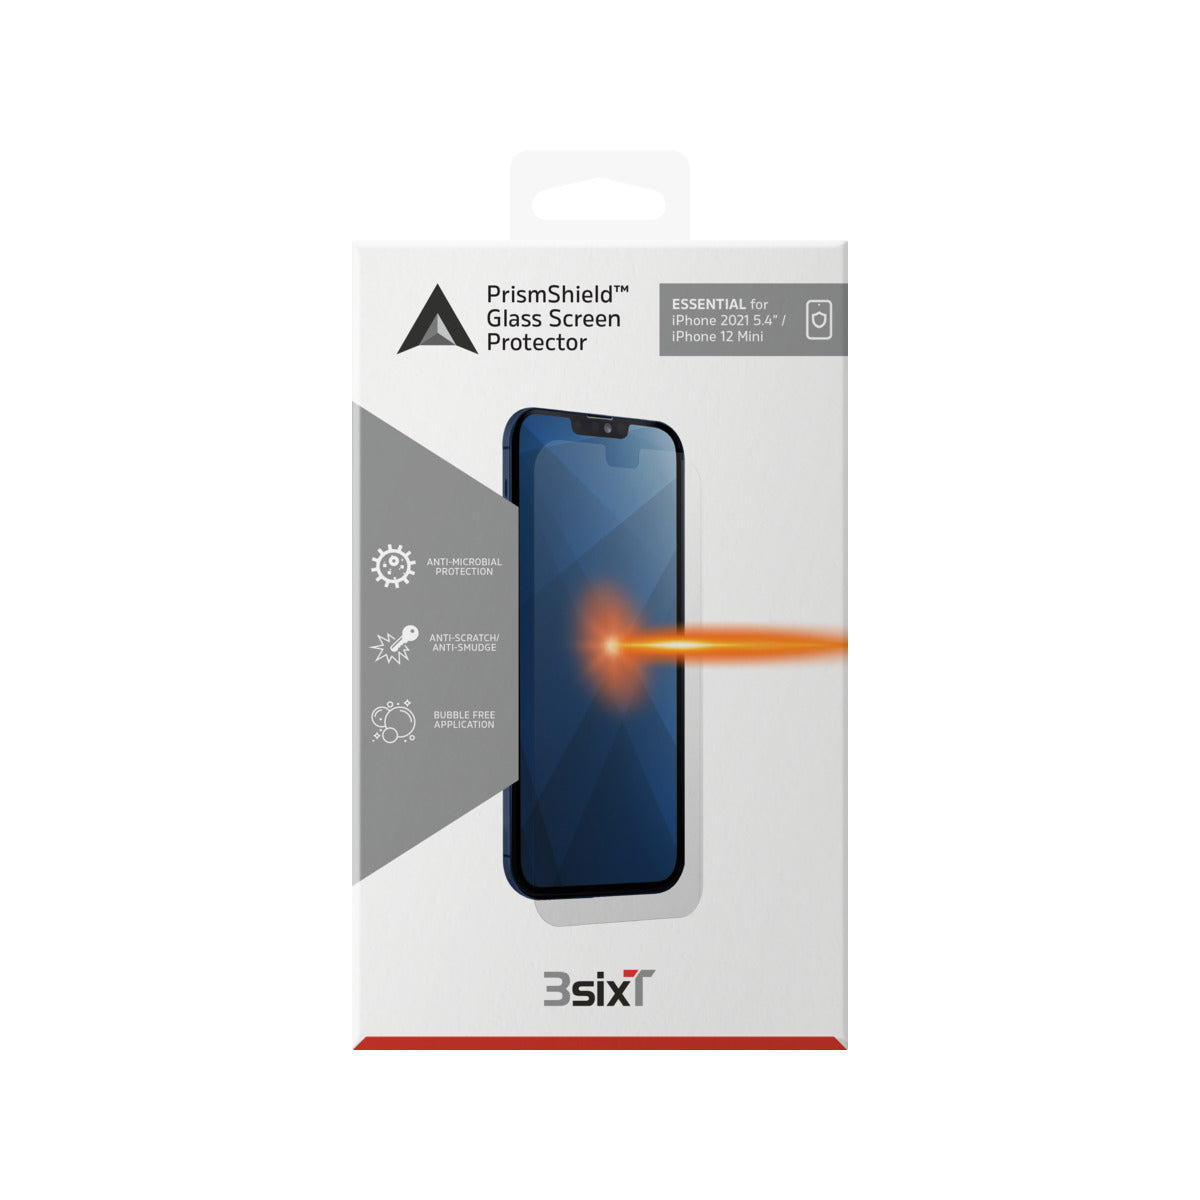 PrismShield™ Essential Glass Screen Protector for iPhone 13 mini.